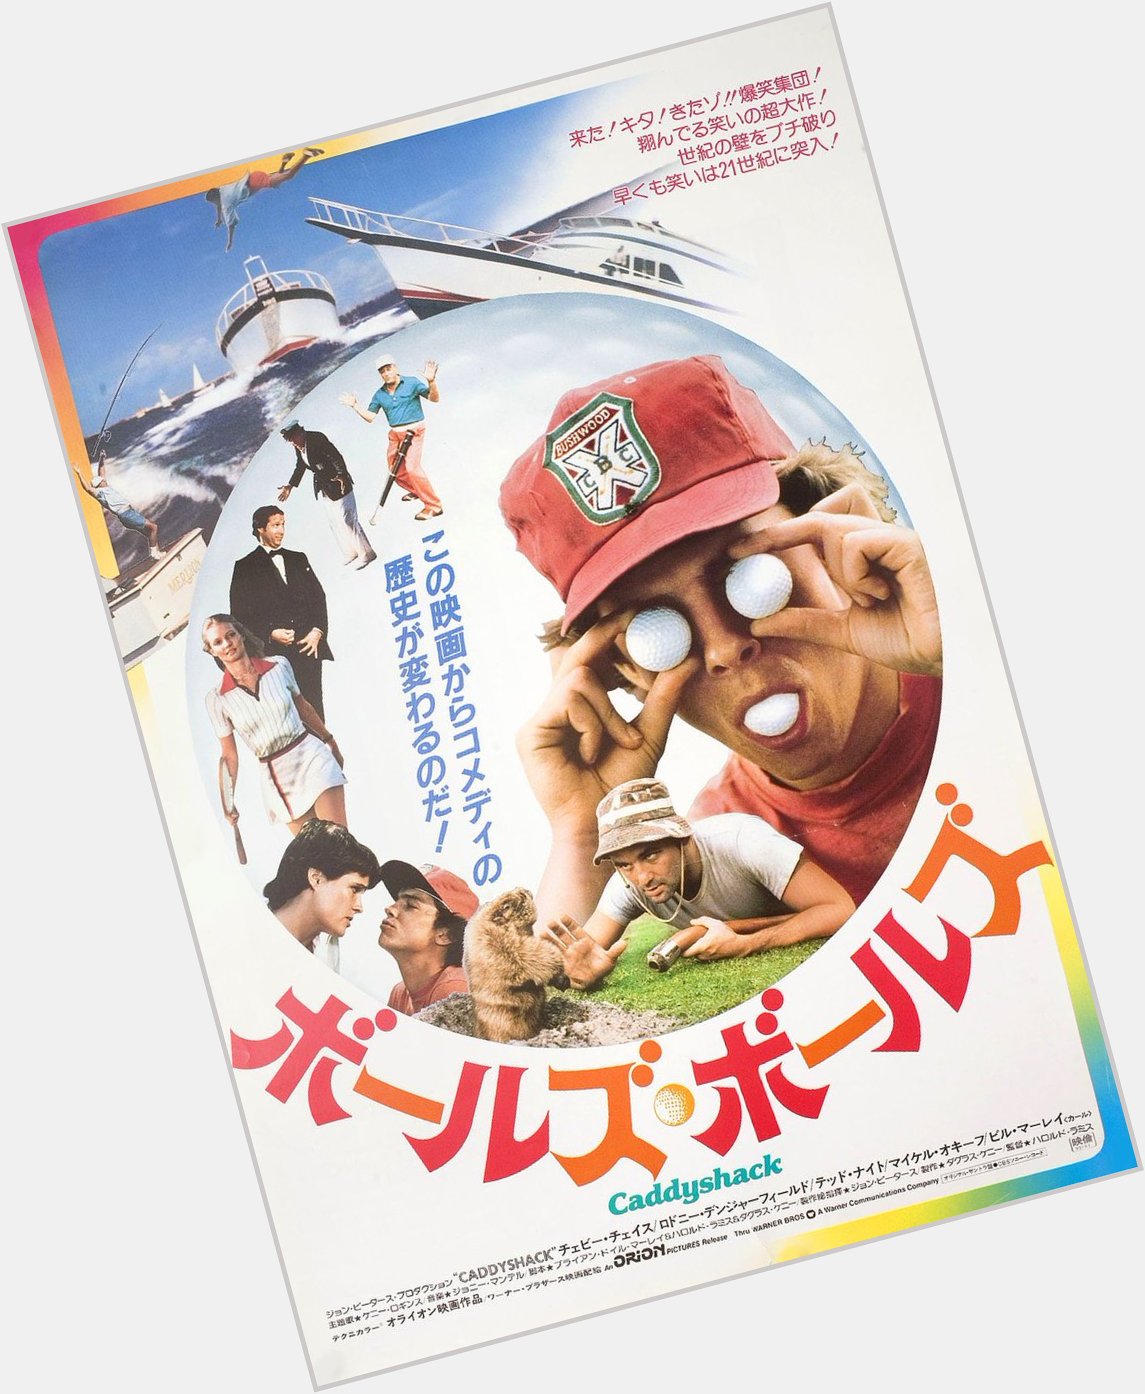 Happy birthday to Bill Murray - CADDYSHACK - 1980 - Japanese release poster 